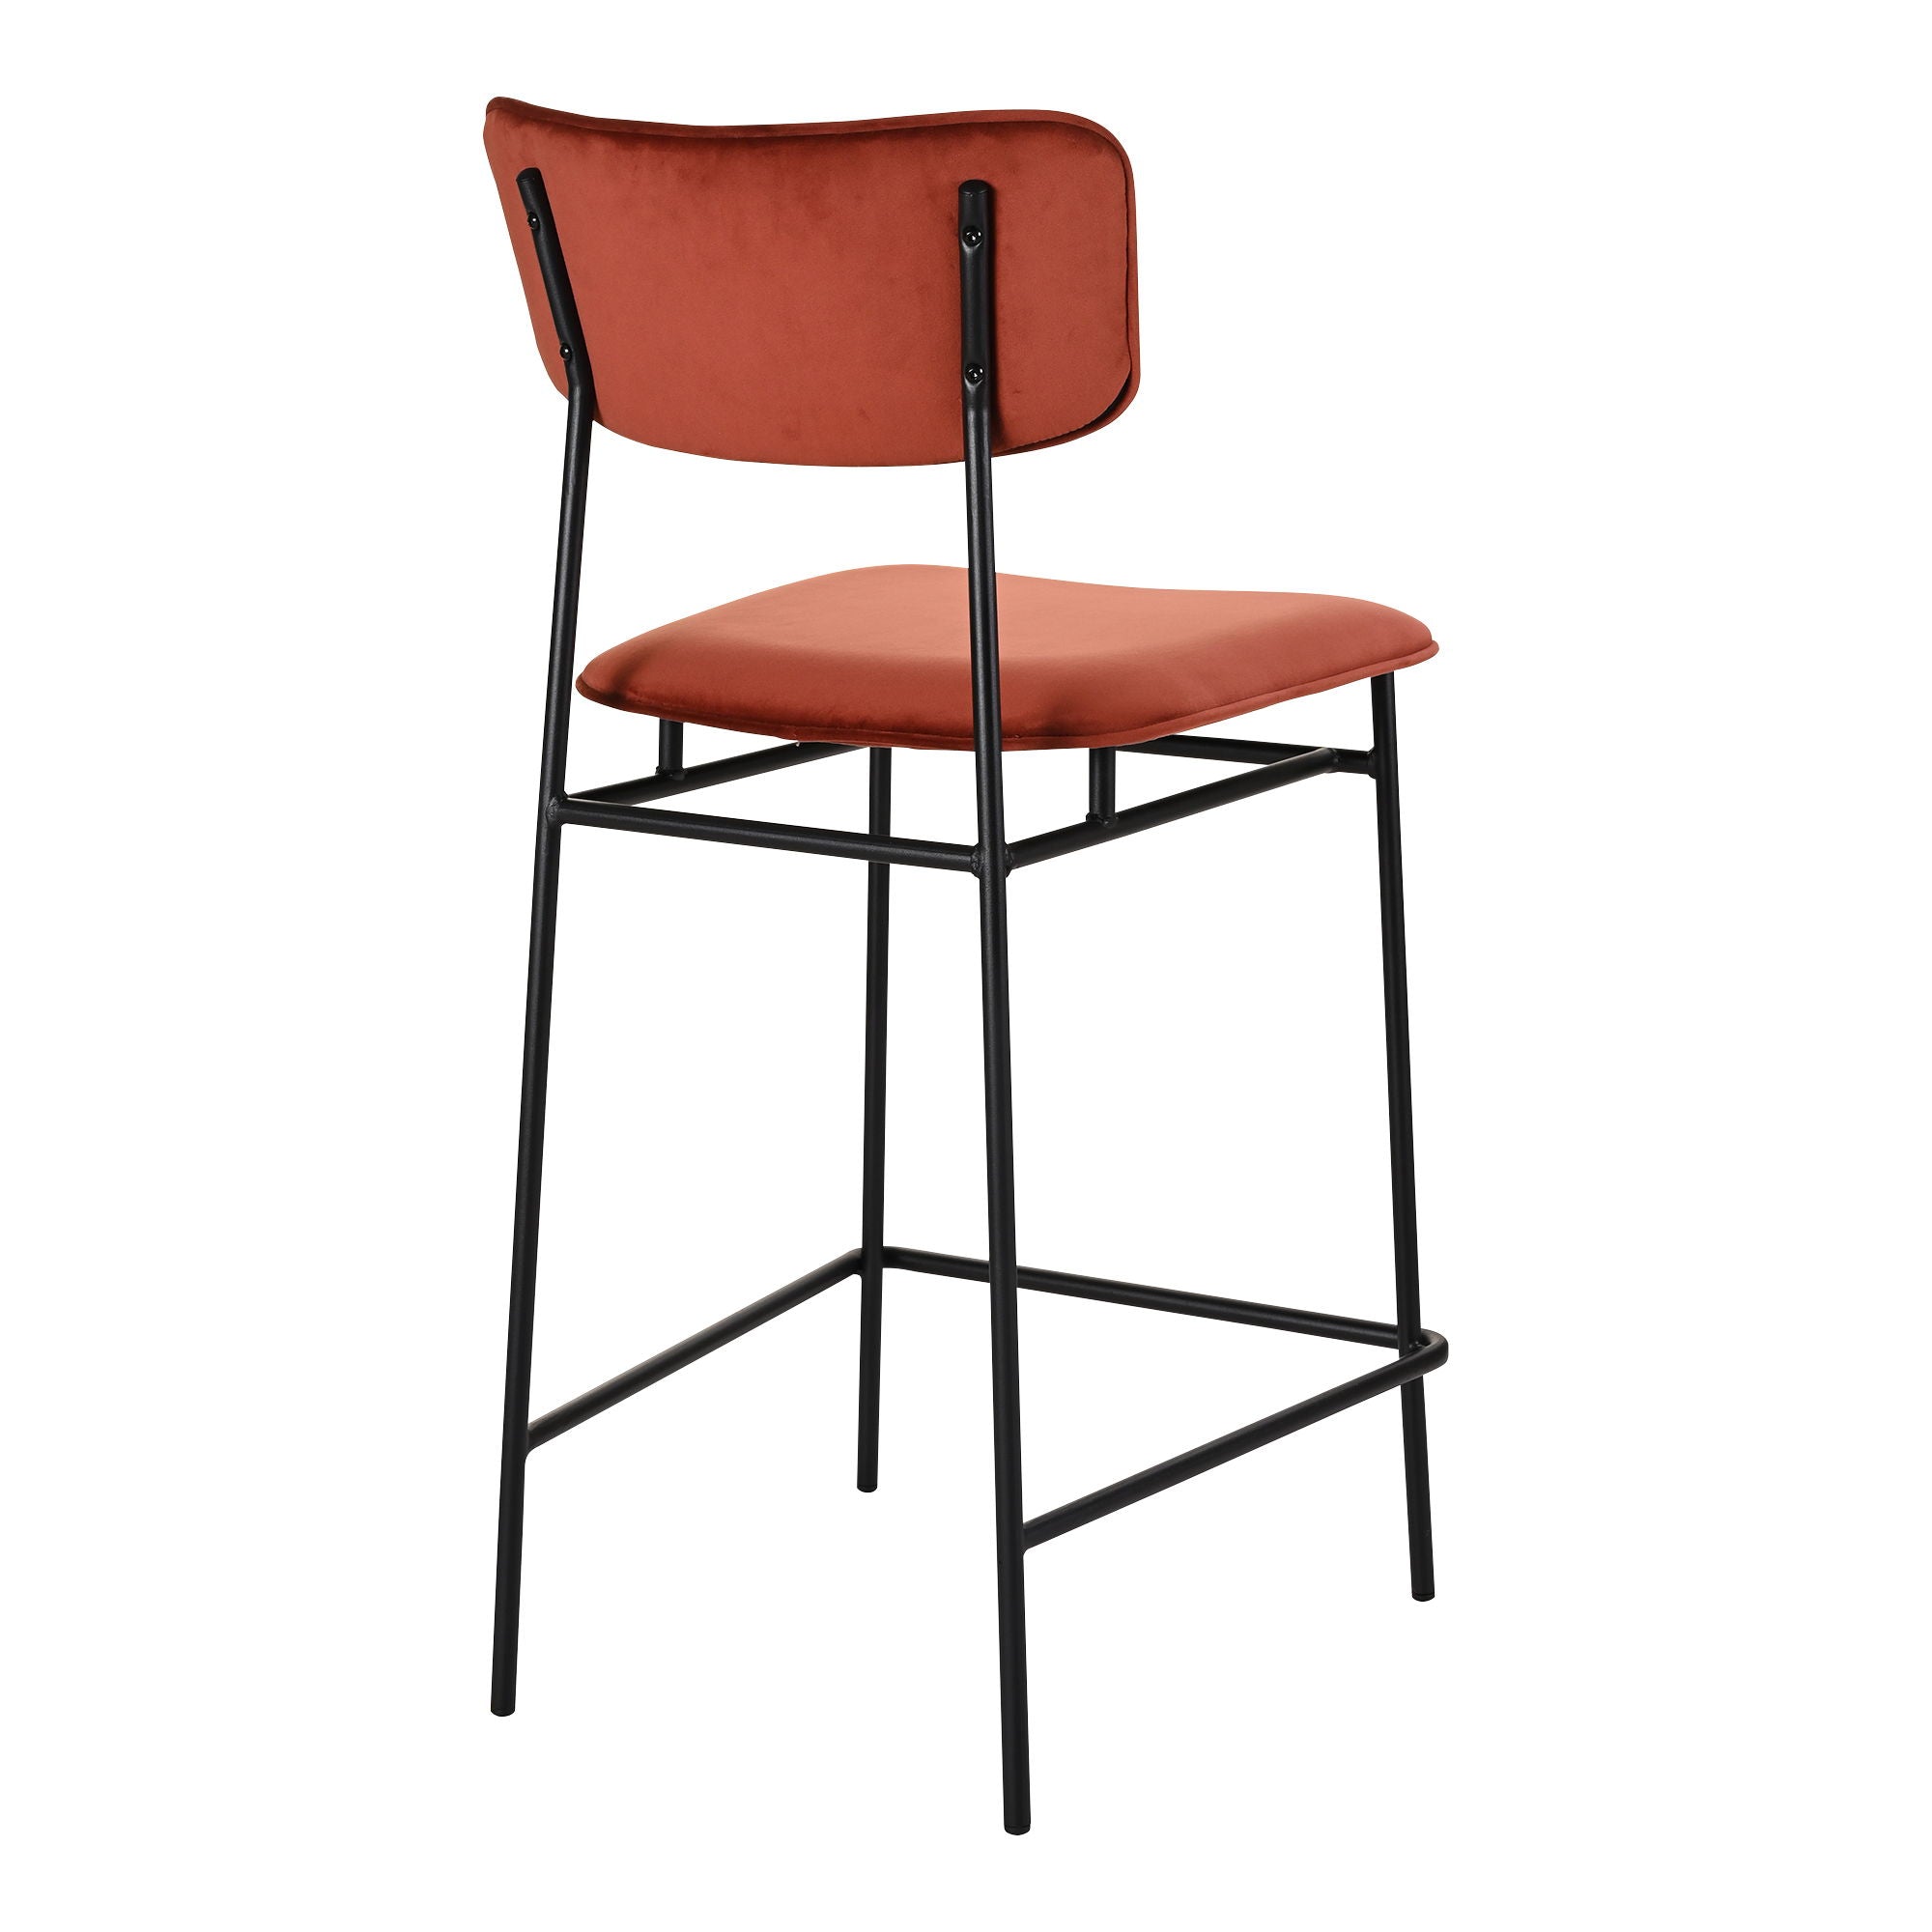 Sailor - Counter Stool - Red